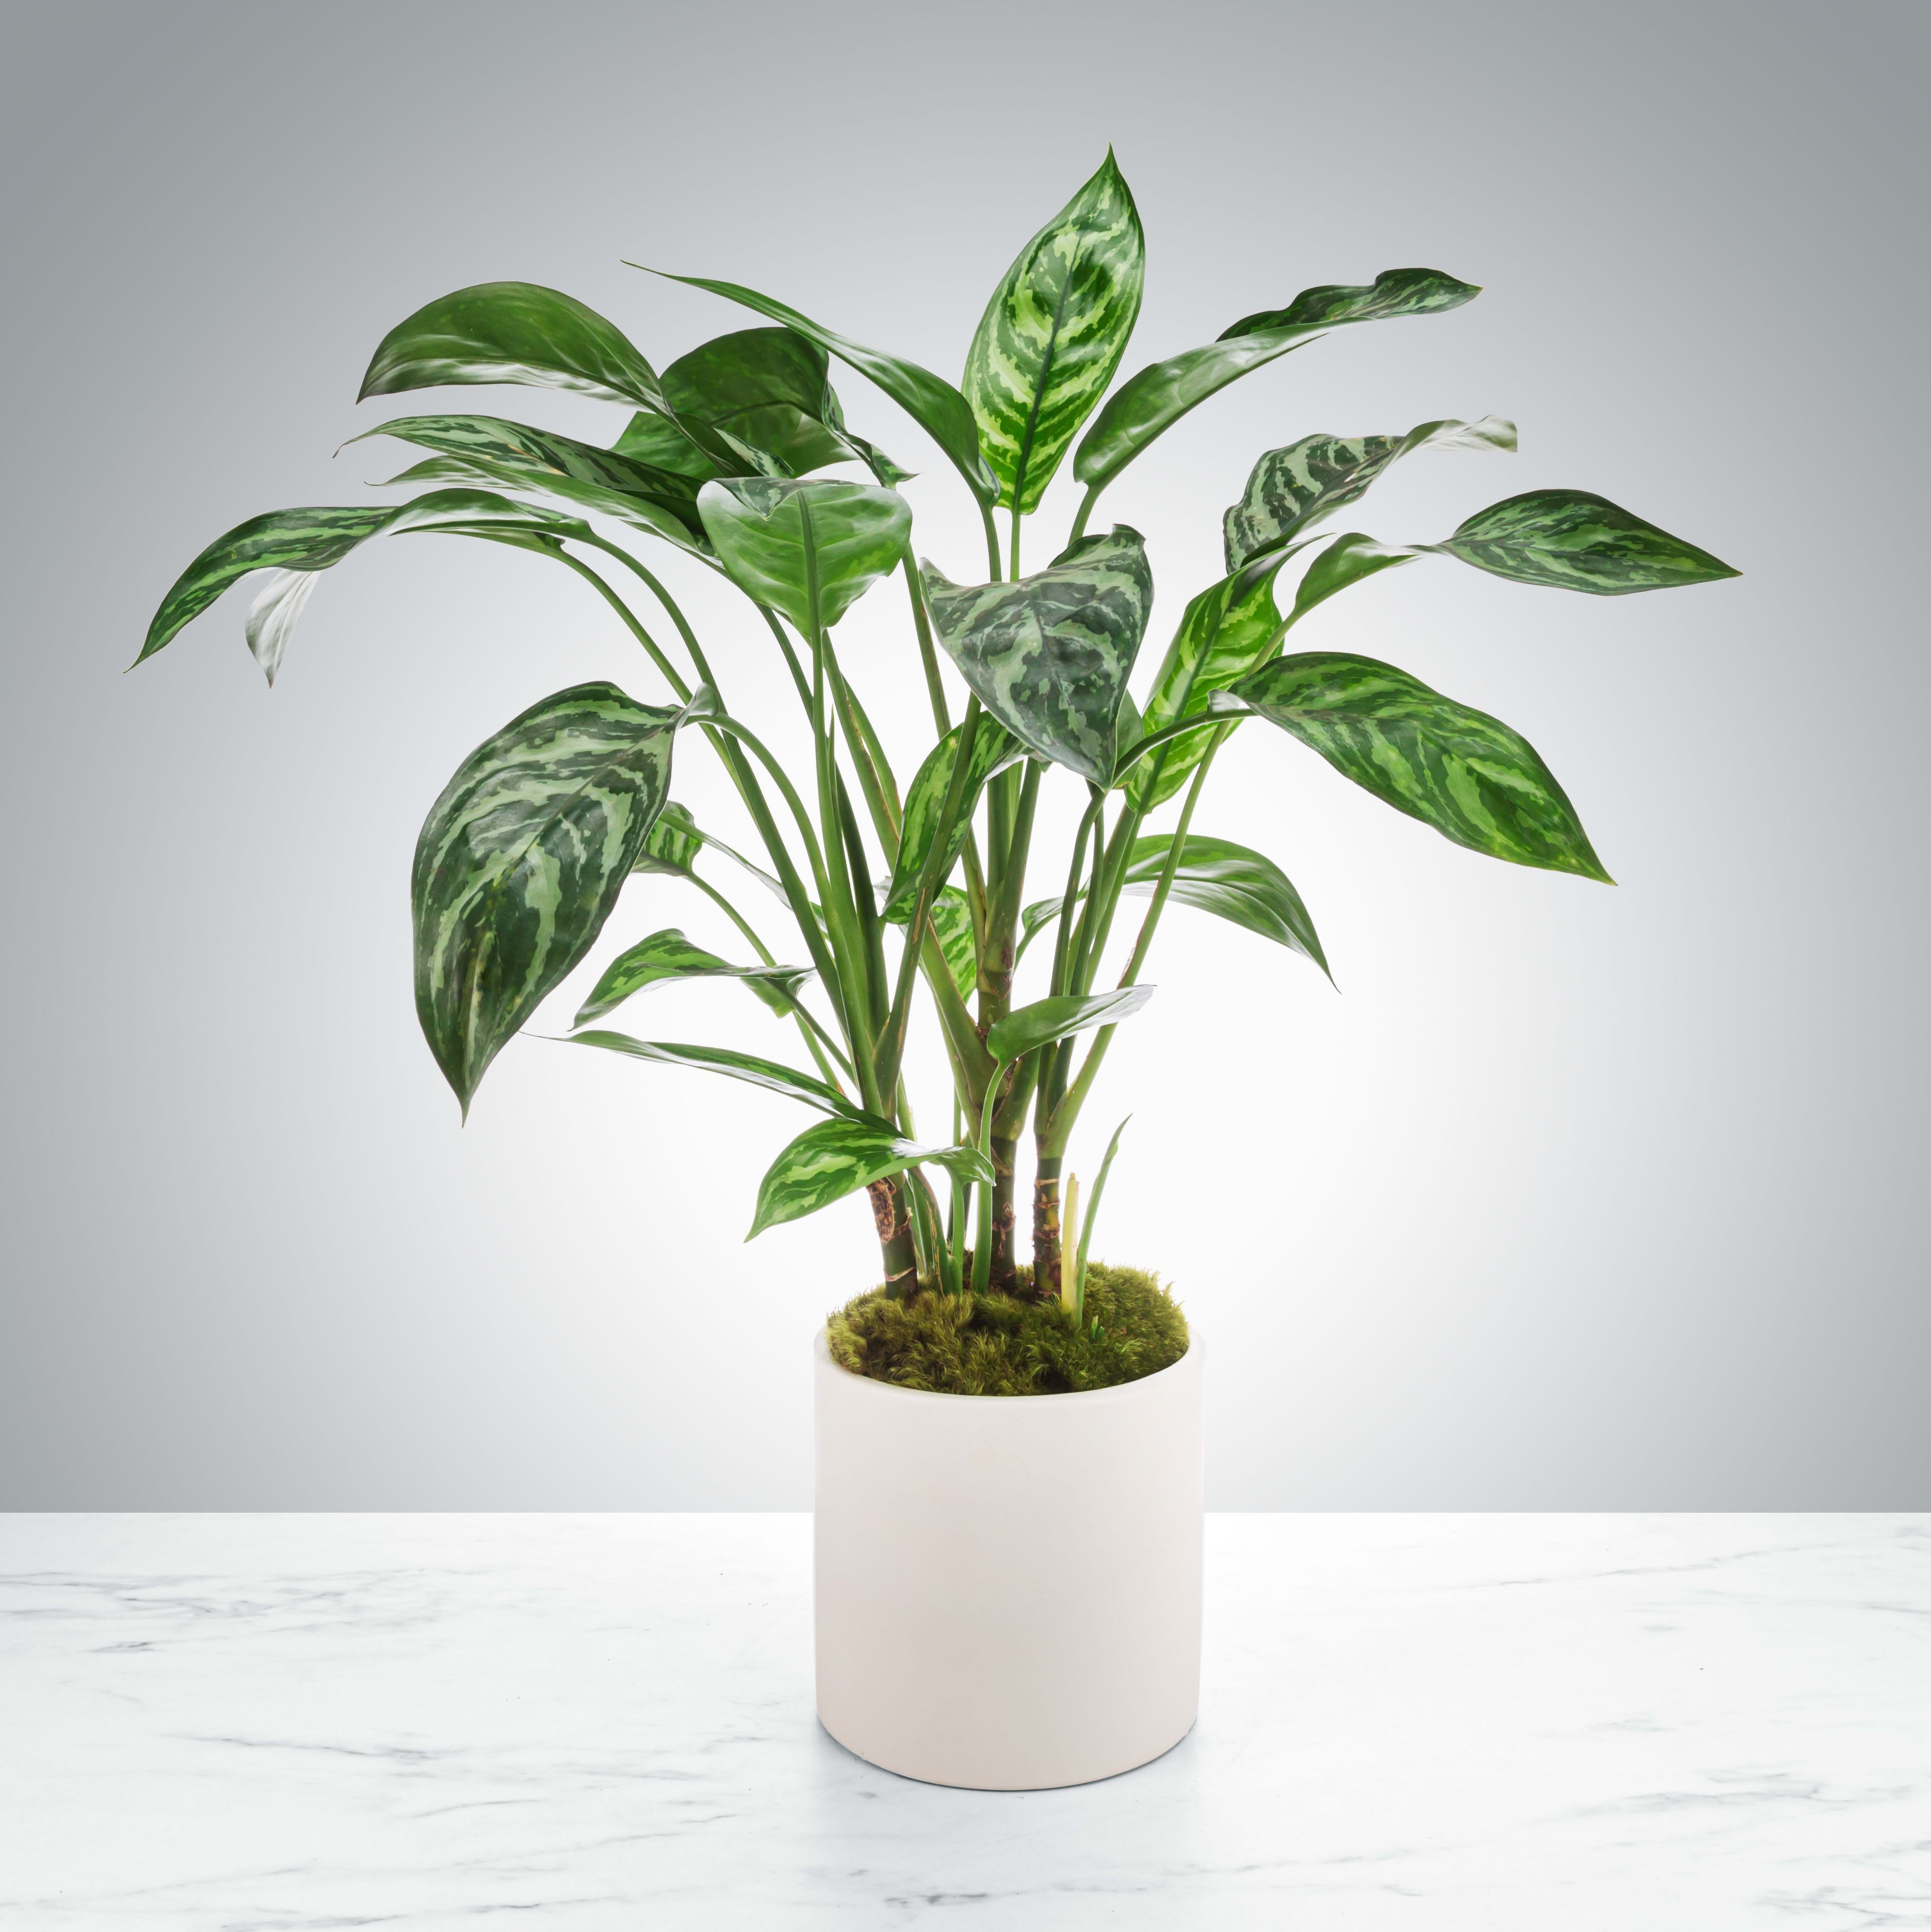 Dieffenbachia (Dumb Cane) Plant  - Dumb cane plants do well when you keep the top layer of soil wet, but be careful to not overwater! They like filtered light and can improve any space aesthetically. Send one as a thank you gift for a job well done or as a congratulations award.